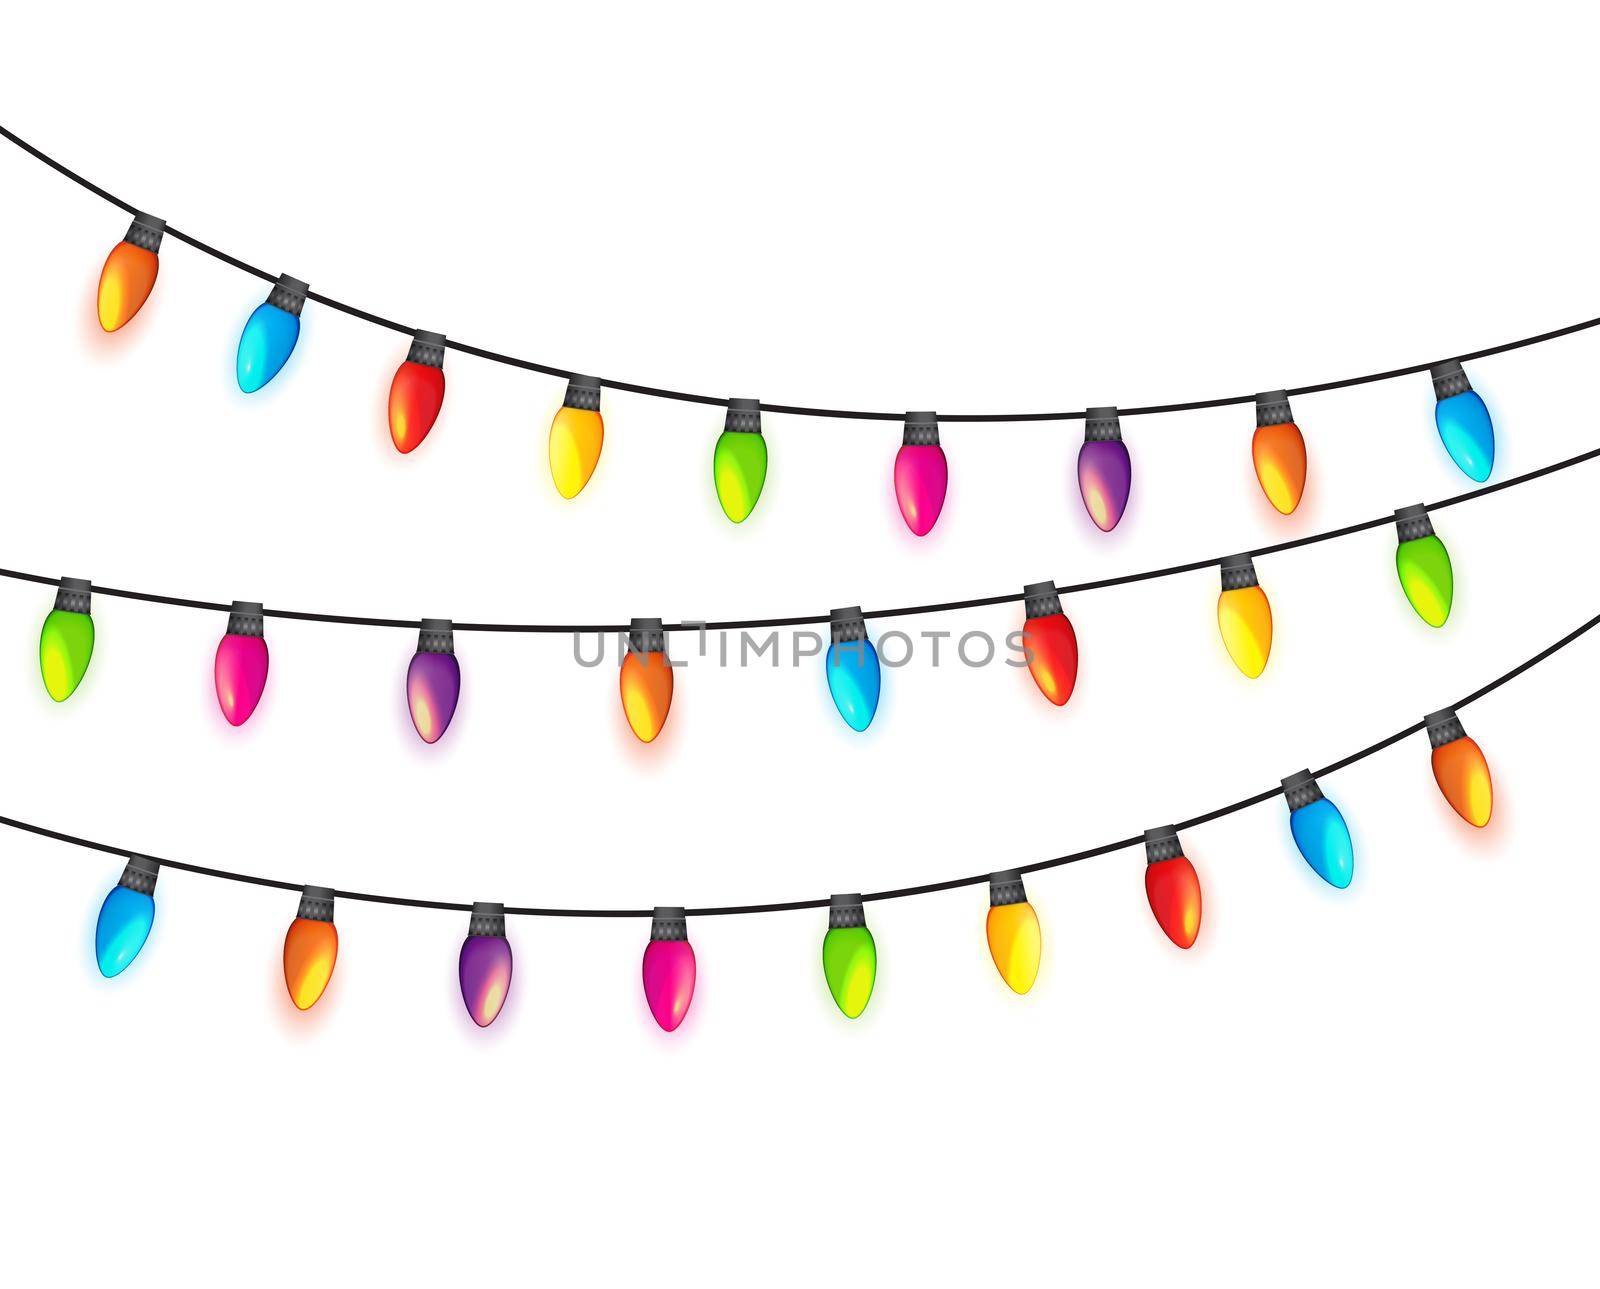 Multicolored Garland Lamp Bulbs Festive Isolated by yganko